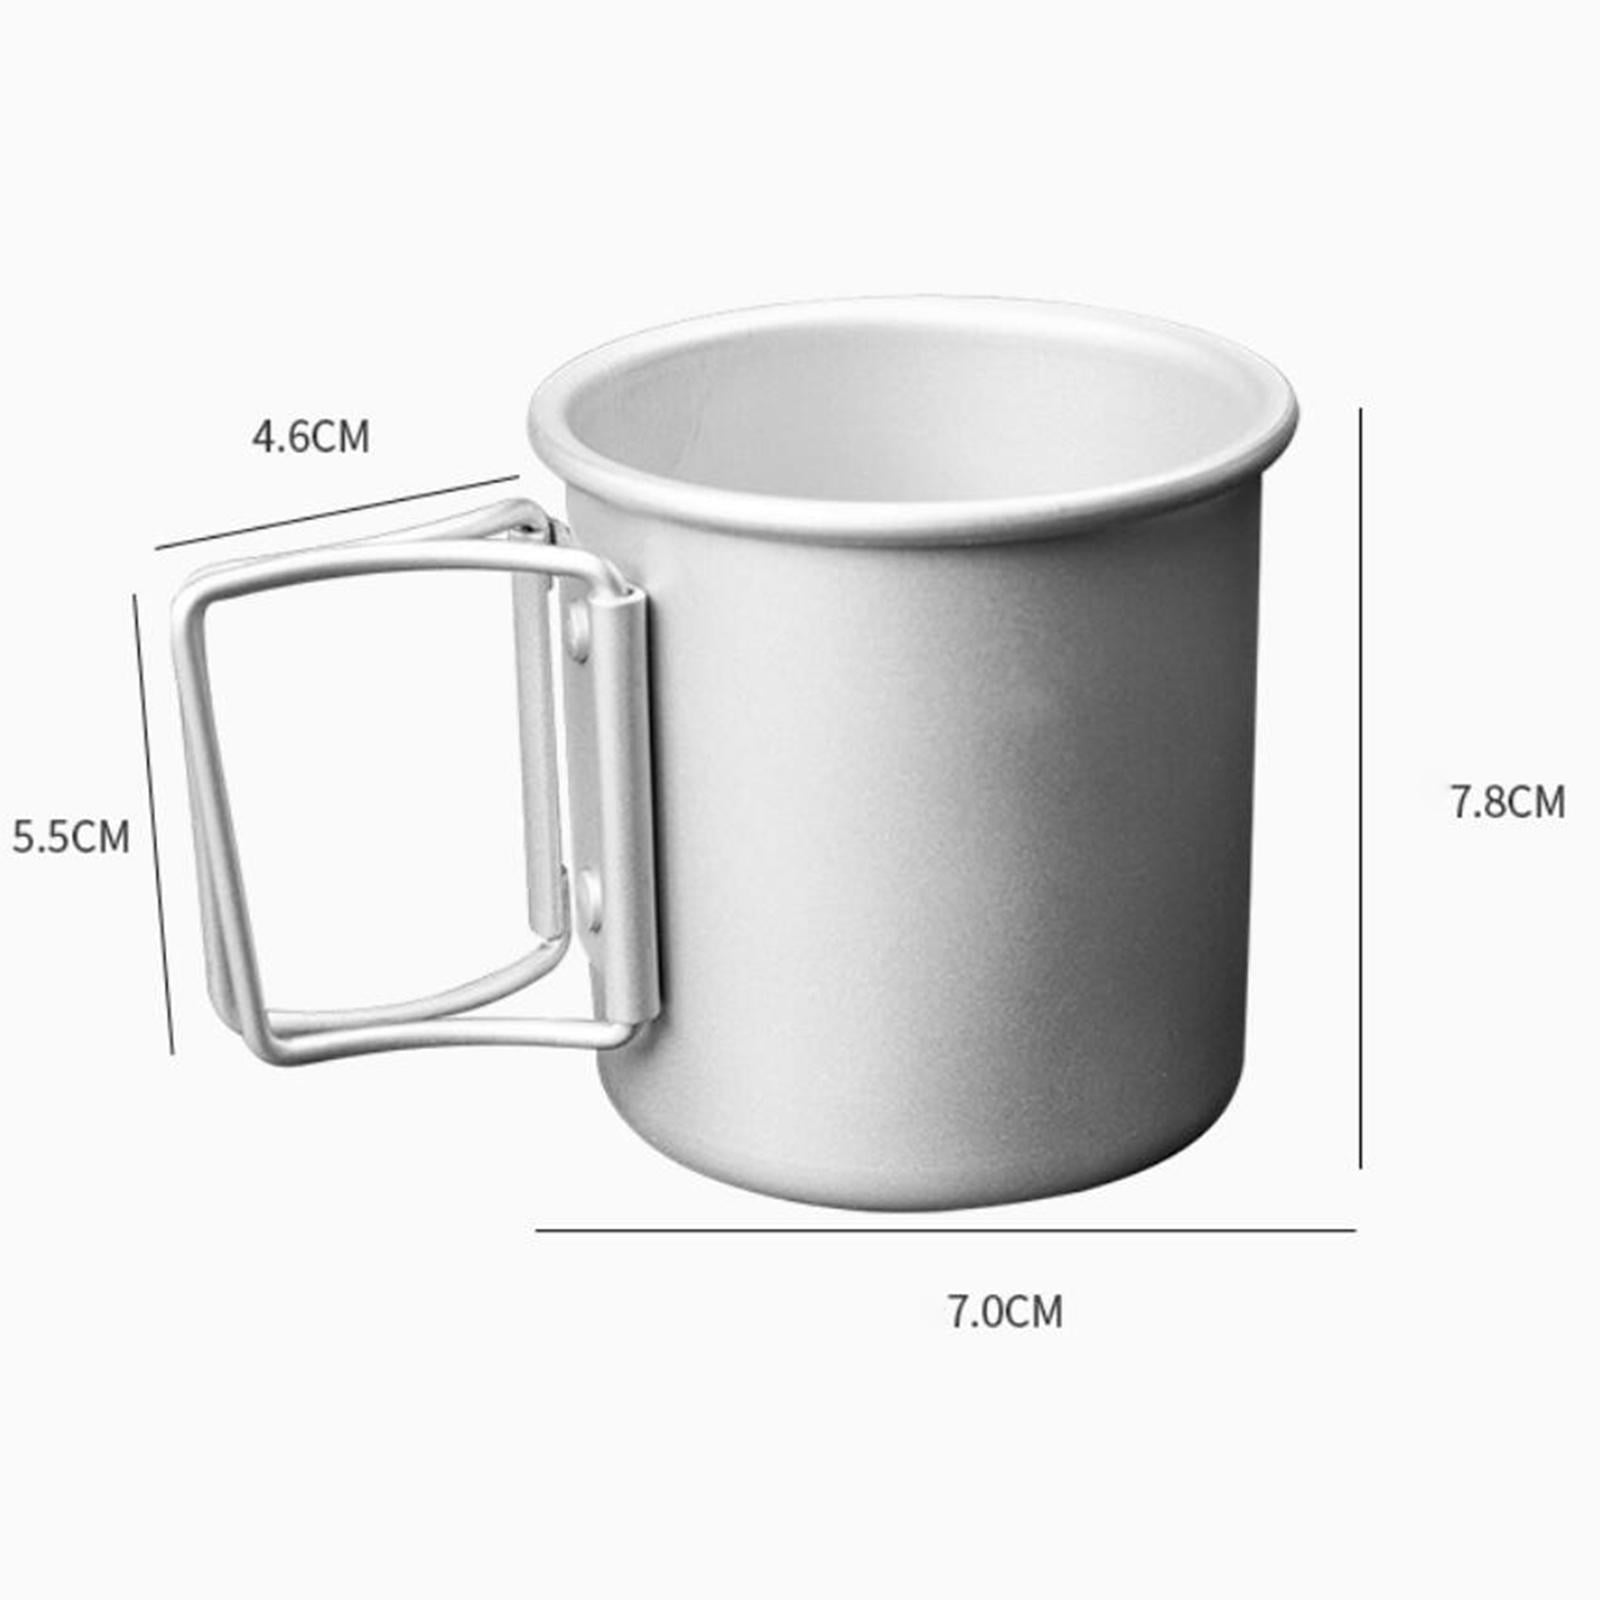 300ml Camping Coffee Tea Mug Aluminum Travel Cup Backpacking Outdoor Silver 